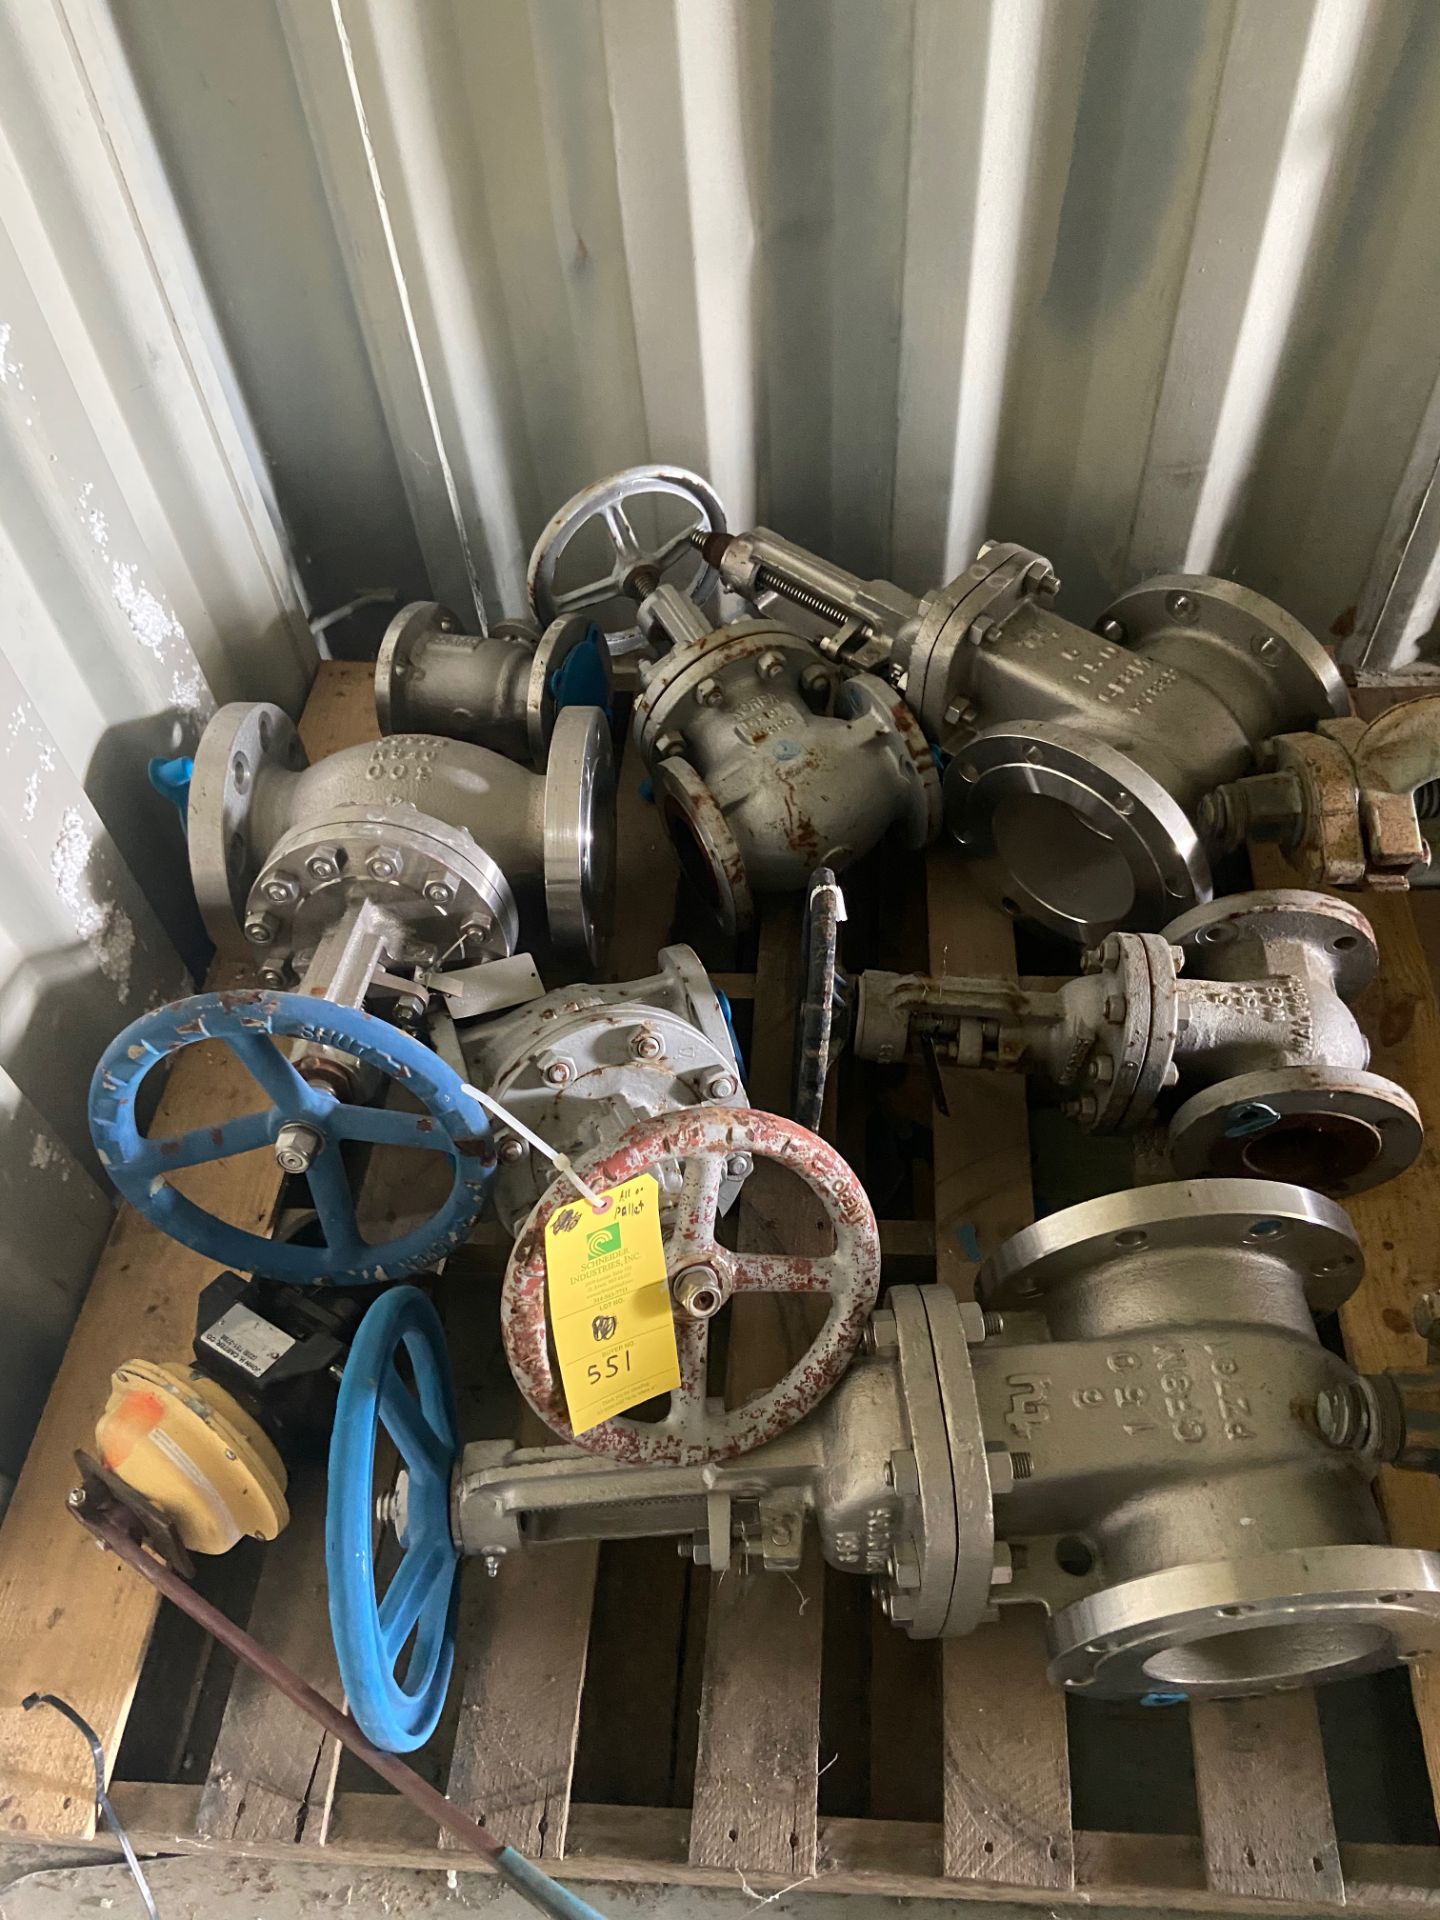 Pallet of Valves: (2) TY 150 Gate Valve, 6"; TY 300 Globe Valve, 4"; (All Pictured) (Located in